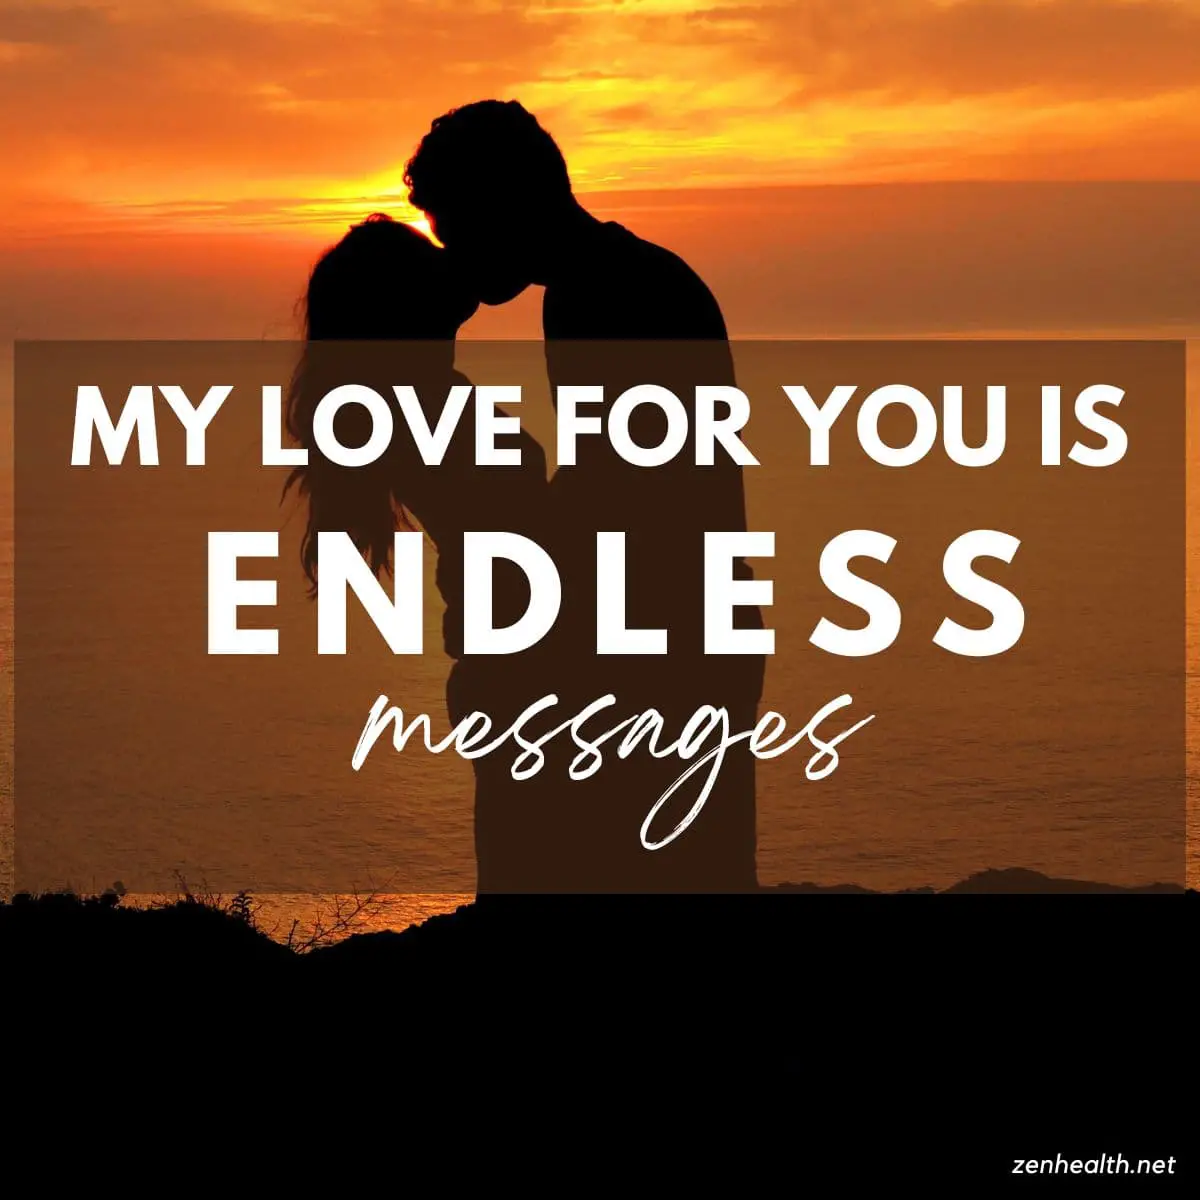 my love for you is endless messages text over a couple kissing in the darkness with a glowing yellow sunset in the background by the sea